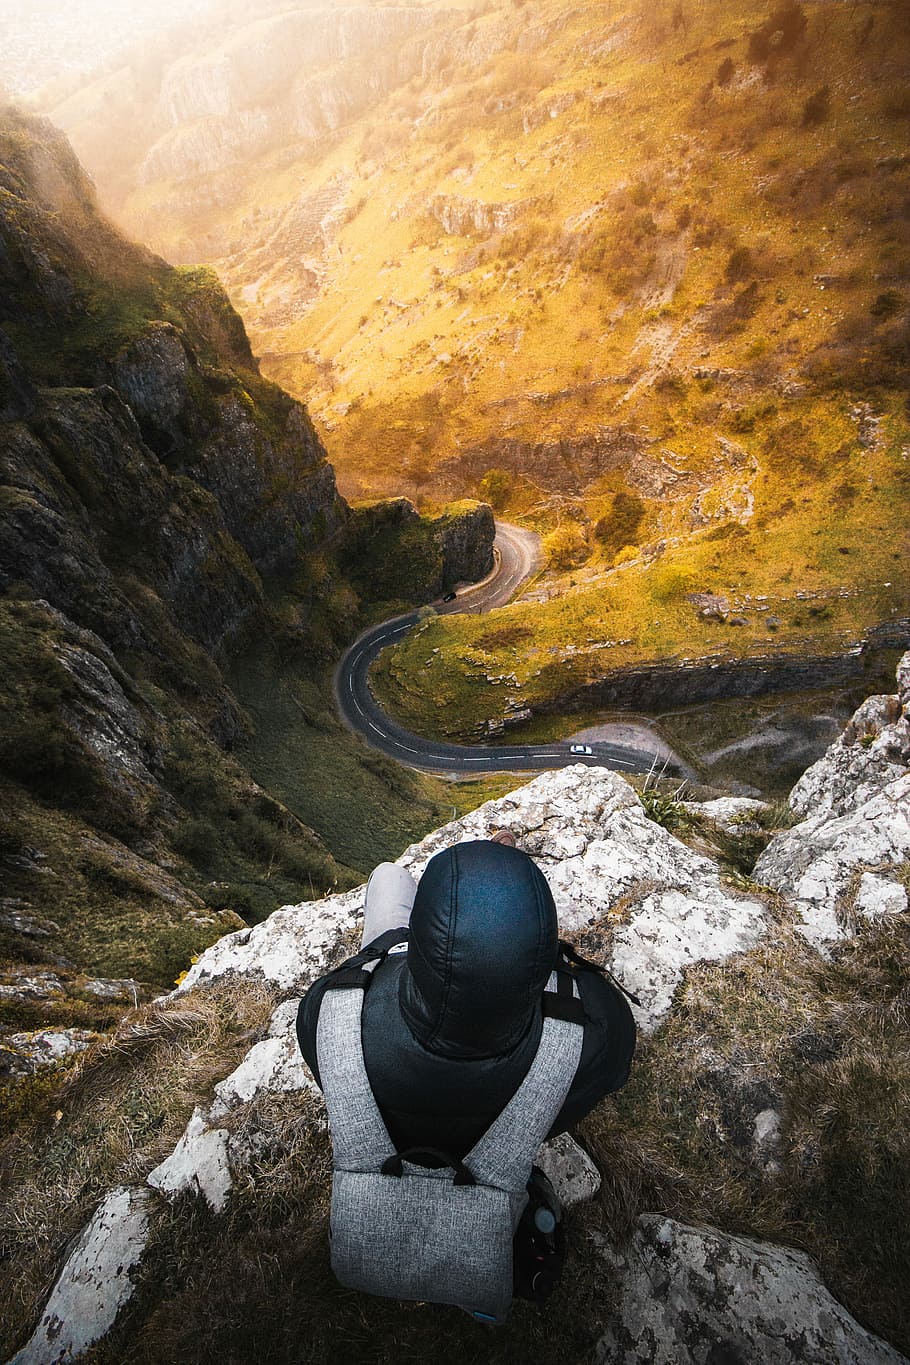 The best views, man sitting on edge of cliff looking down, road